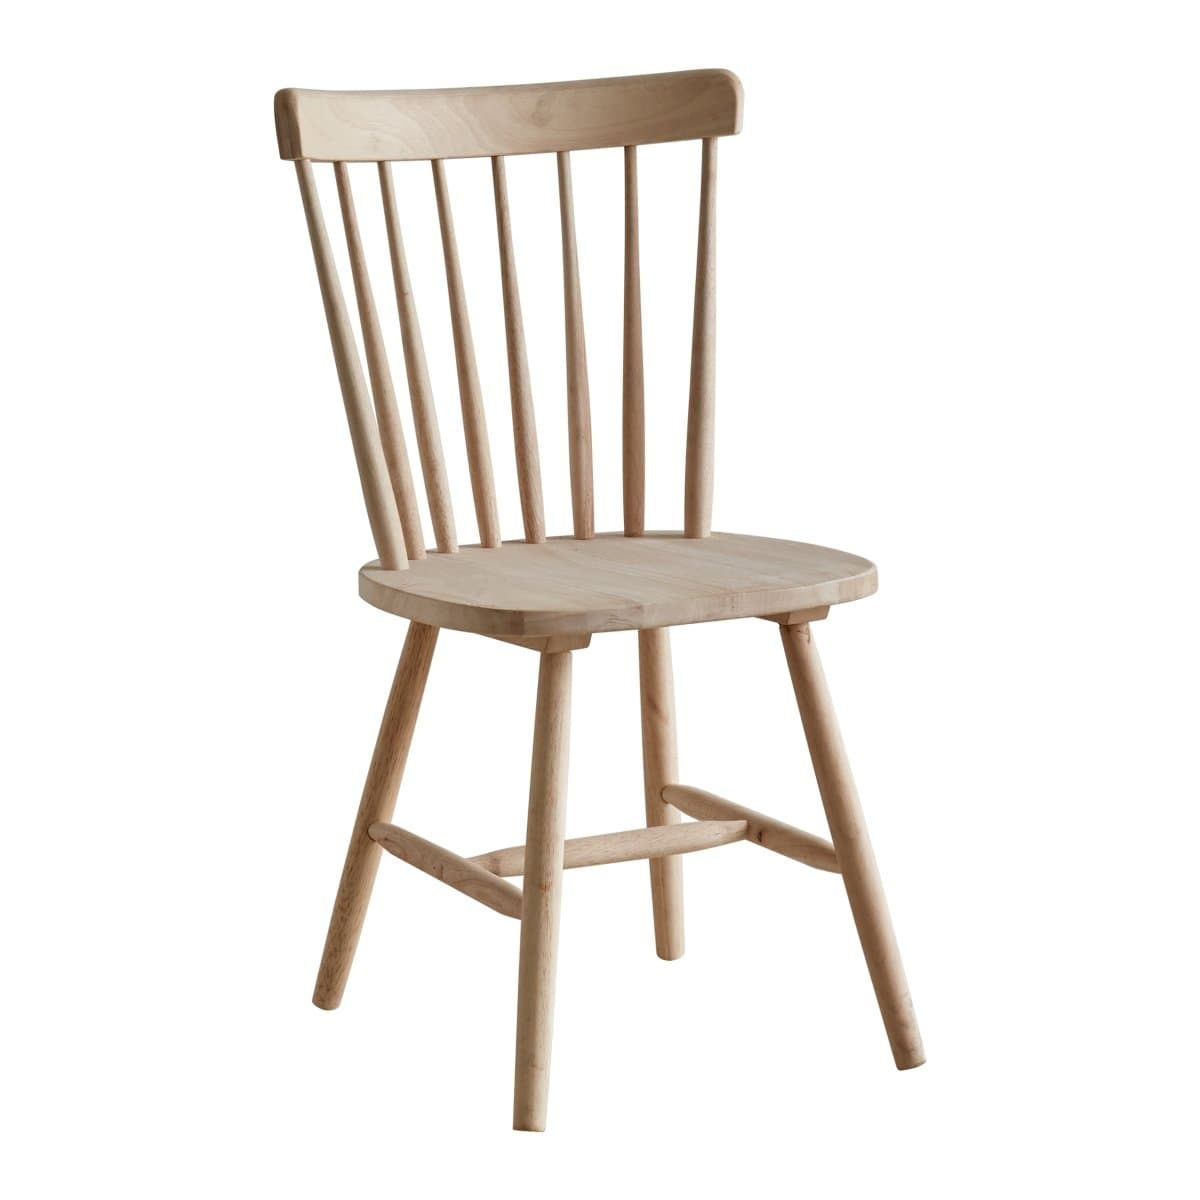 Bloomy Dining Chair (WIL-3901AC) picket and rail